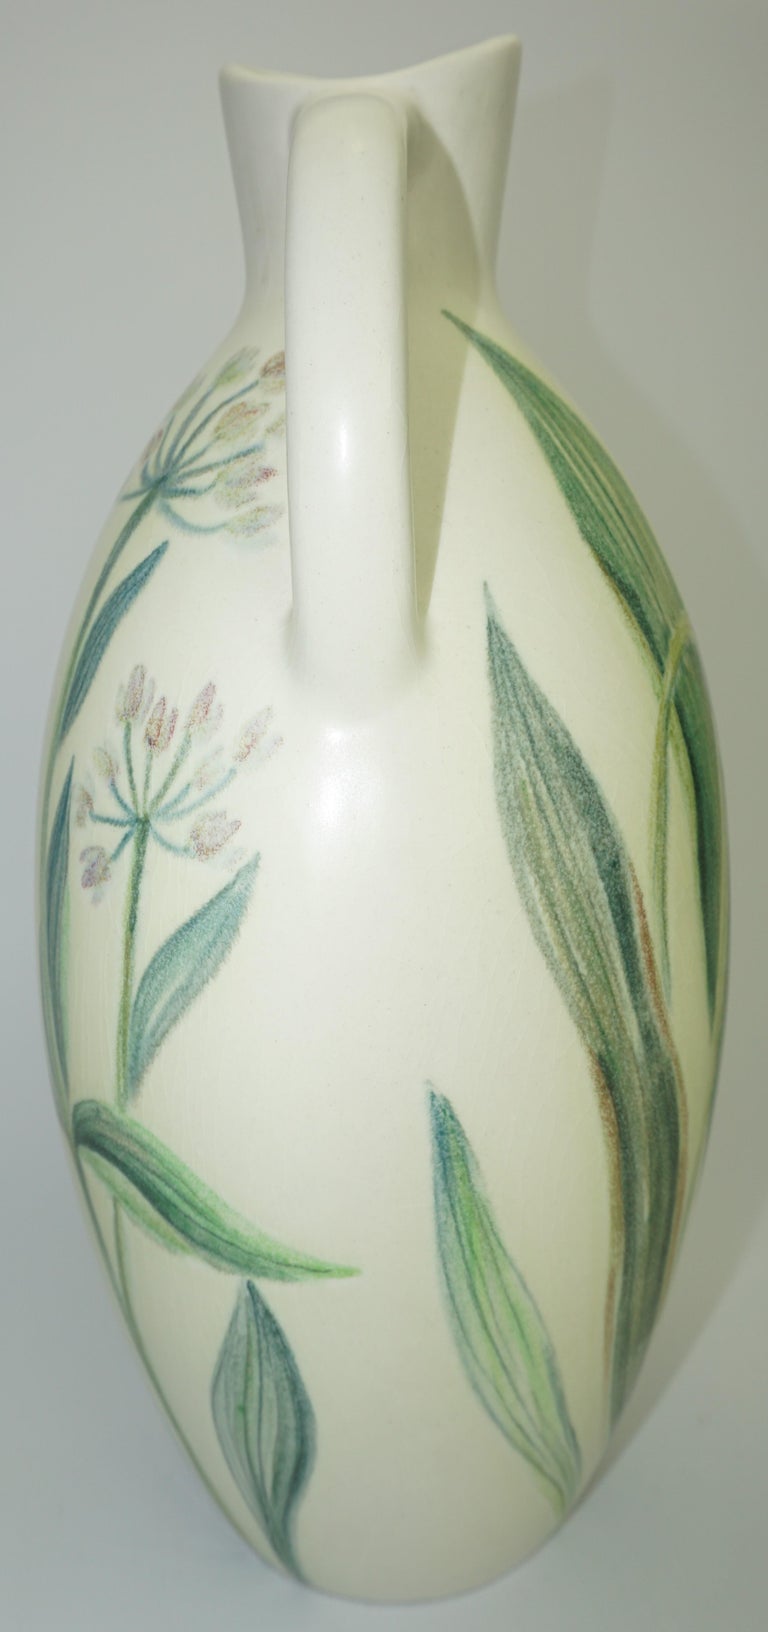 Mid-20th Century Ceramic Vase by Carl-Harry Stalhane, Sweden, C 1950, Summer Floral Pattern For Sale